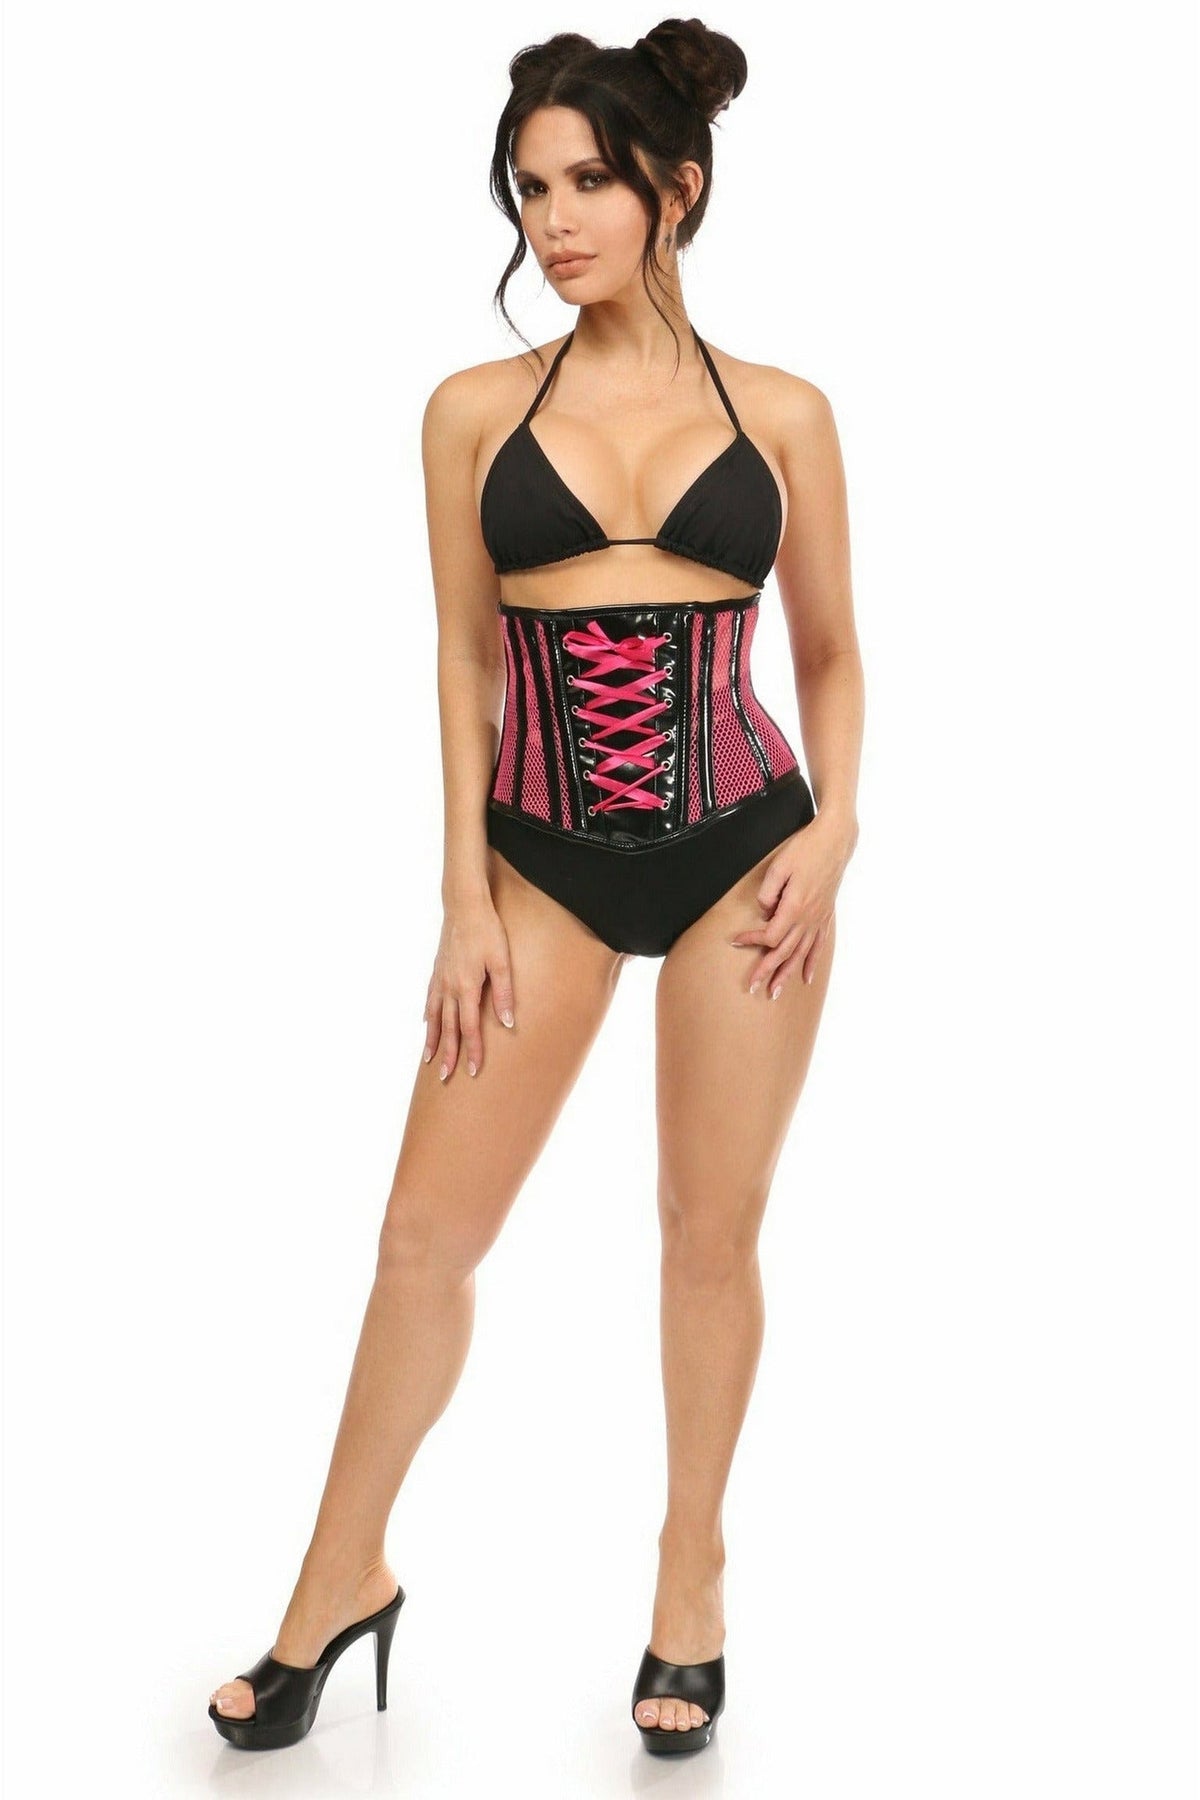 Top Drawer Neon Pink Patent & Fishnet Underbust Corset-Daisy Corsets